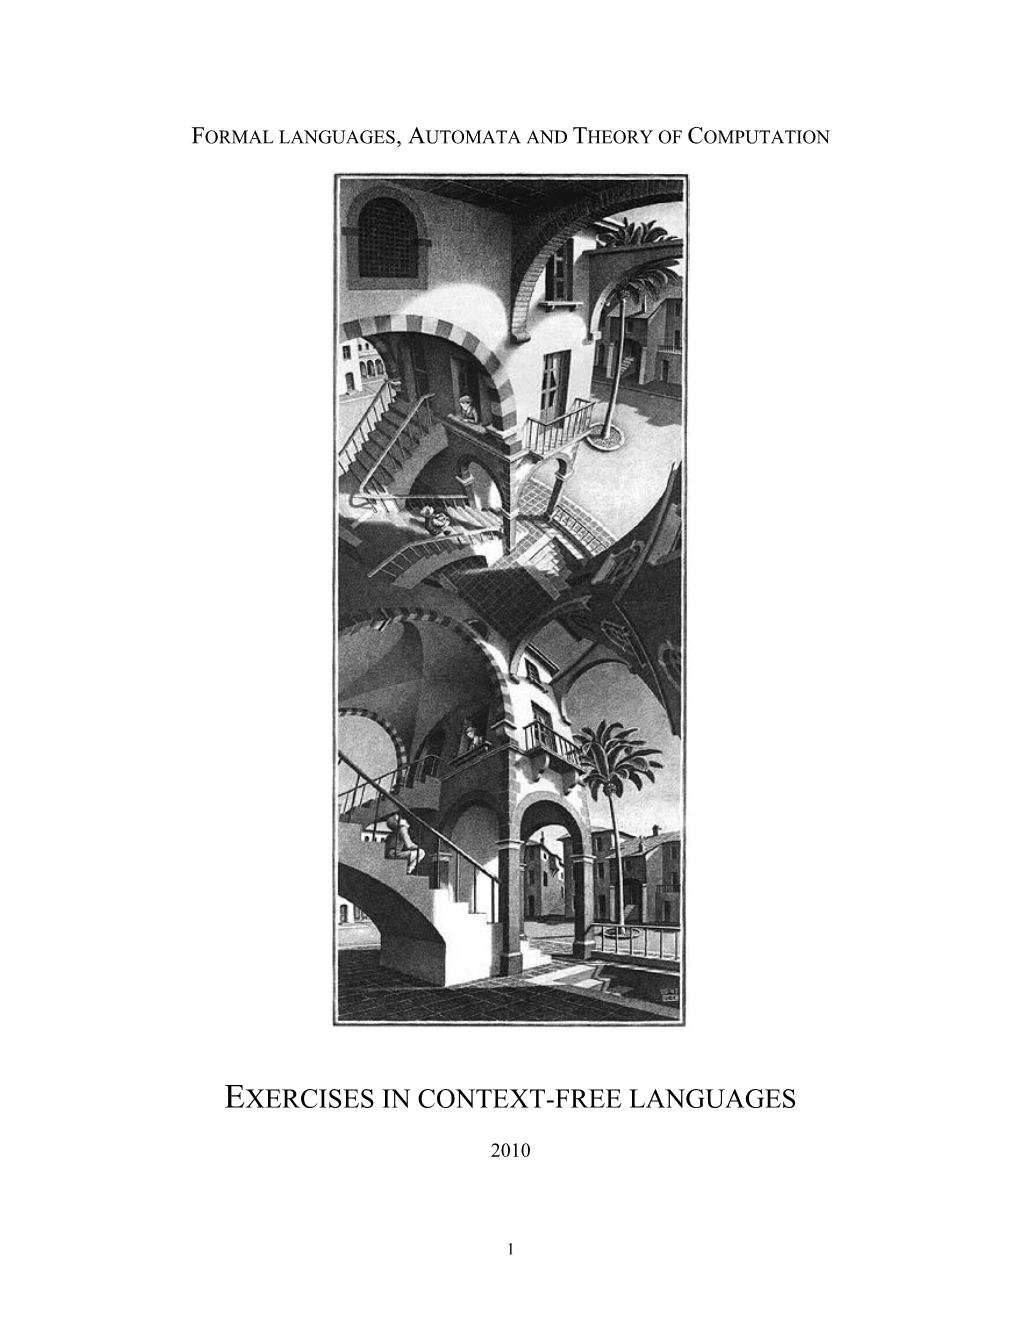 Formal Languages, Automata and Theory of Computation